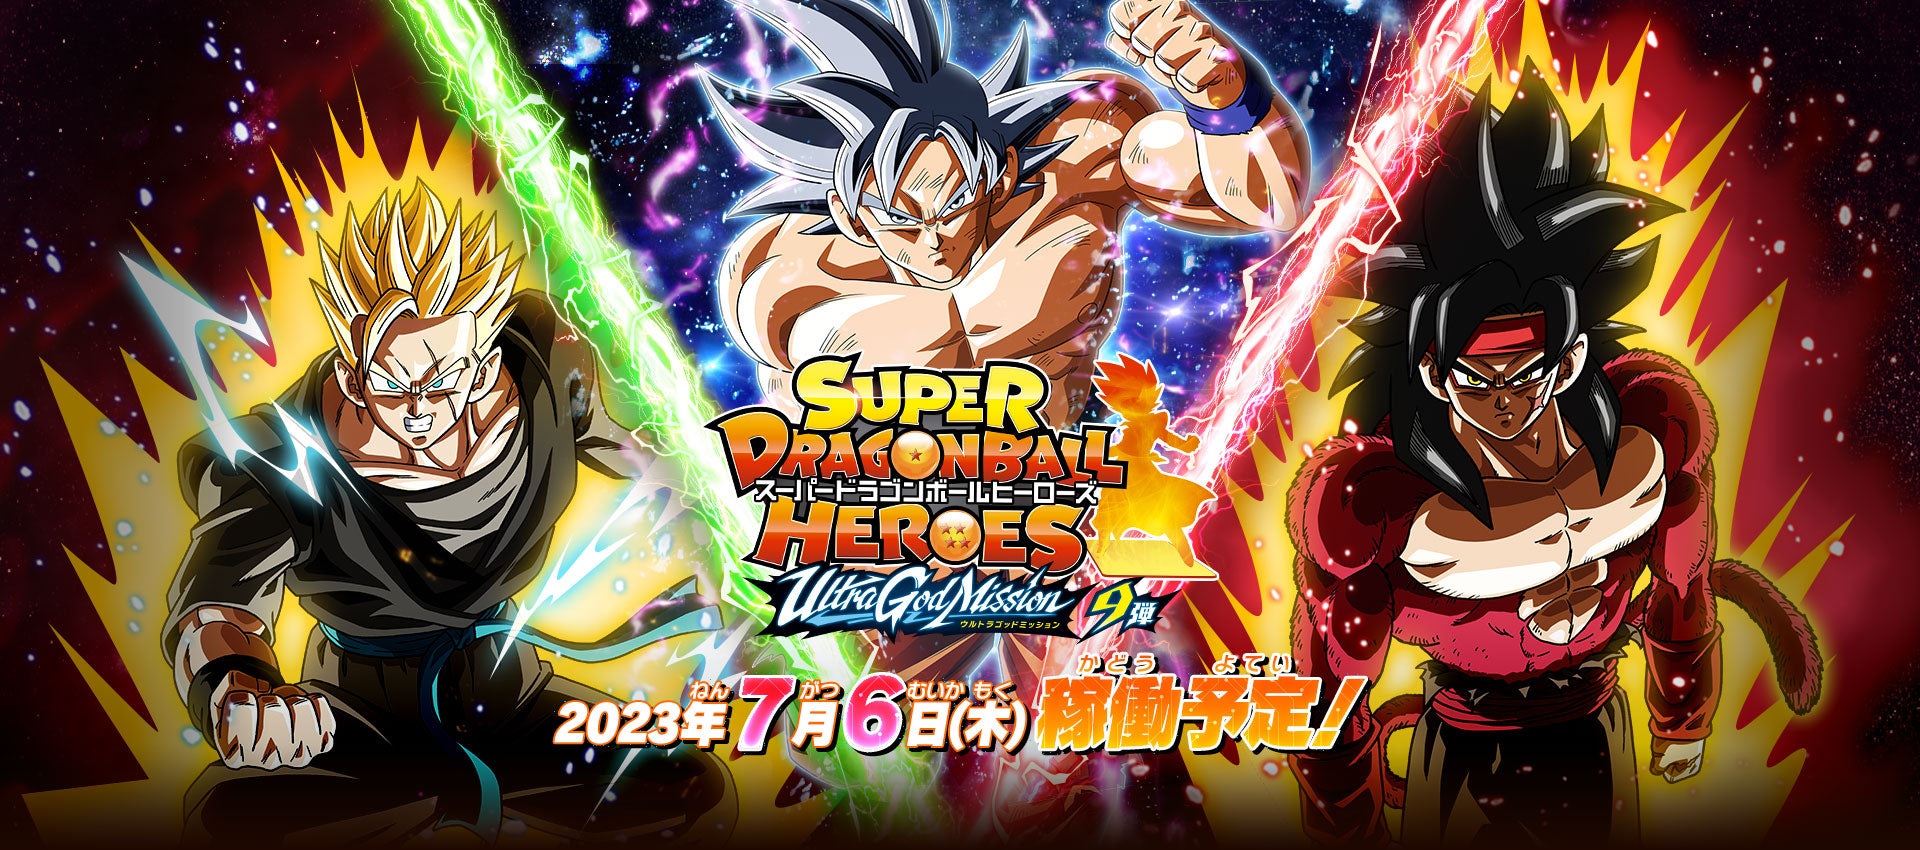 SUPER DRAGON BALL HEROES ULTRA GOD MISSION 9 (SDBH UGM9) cards list